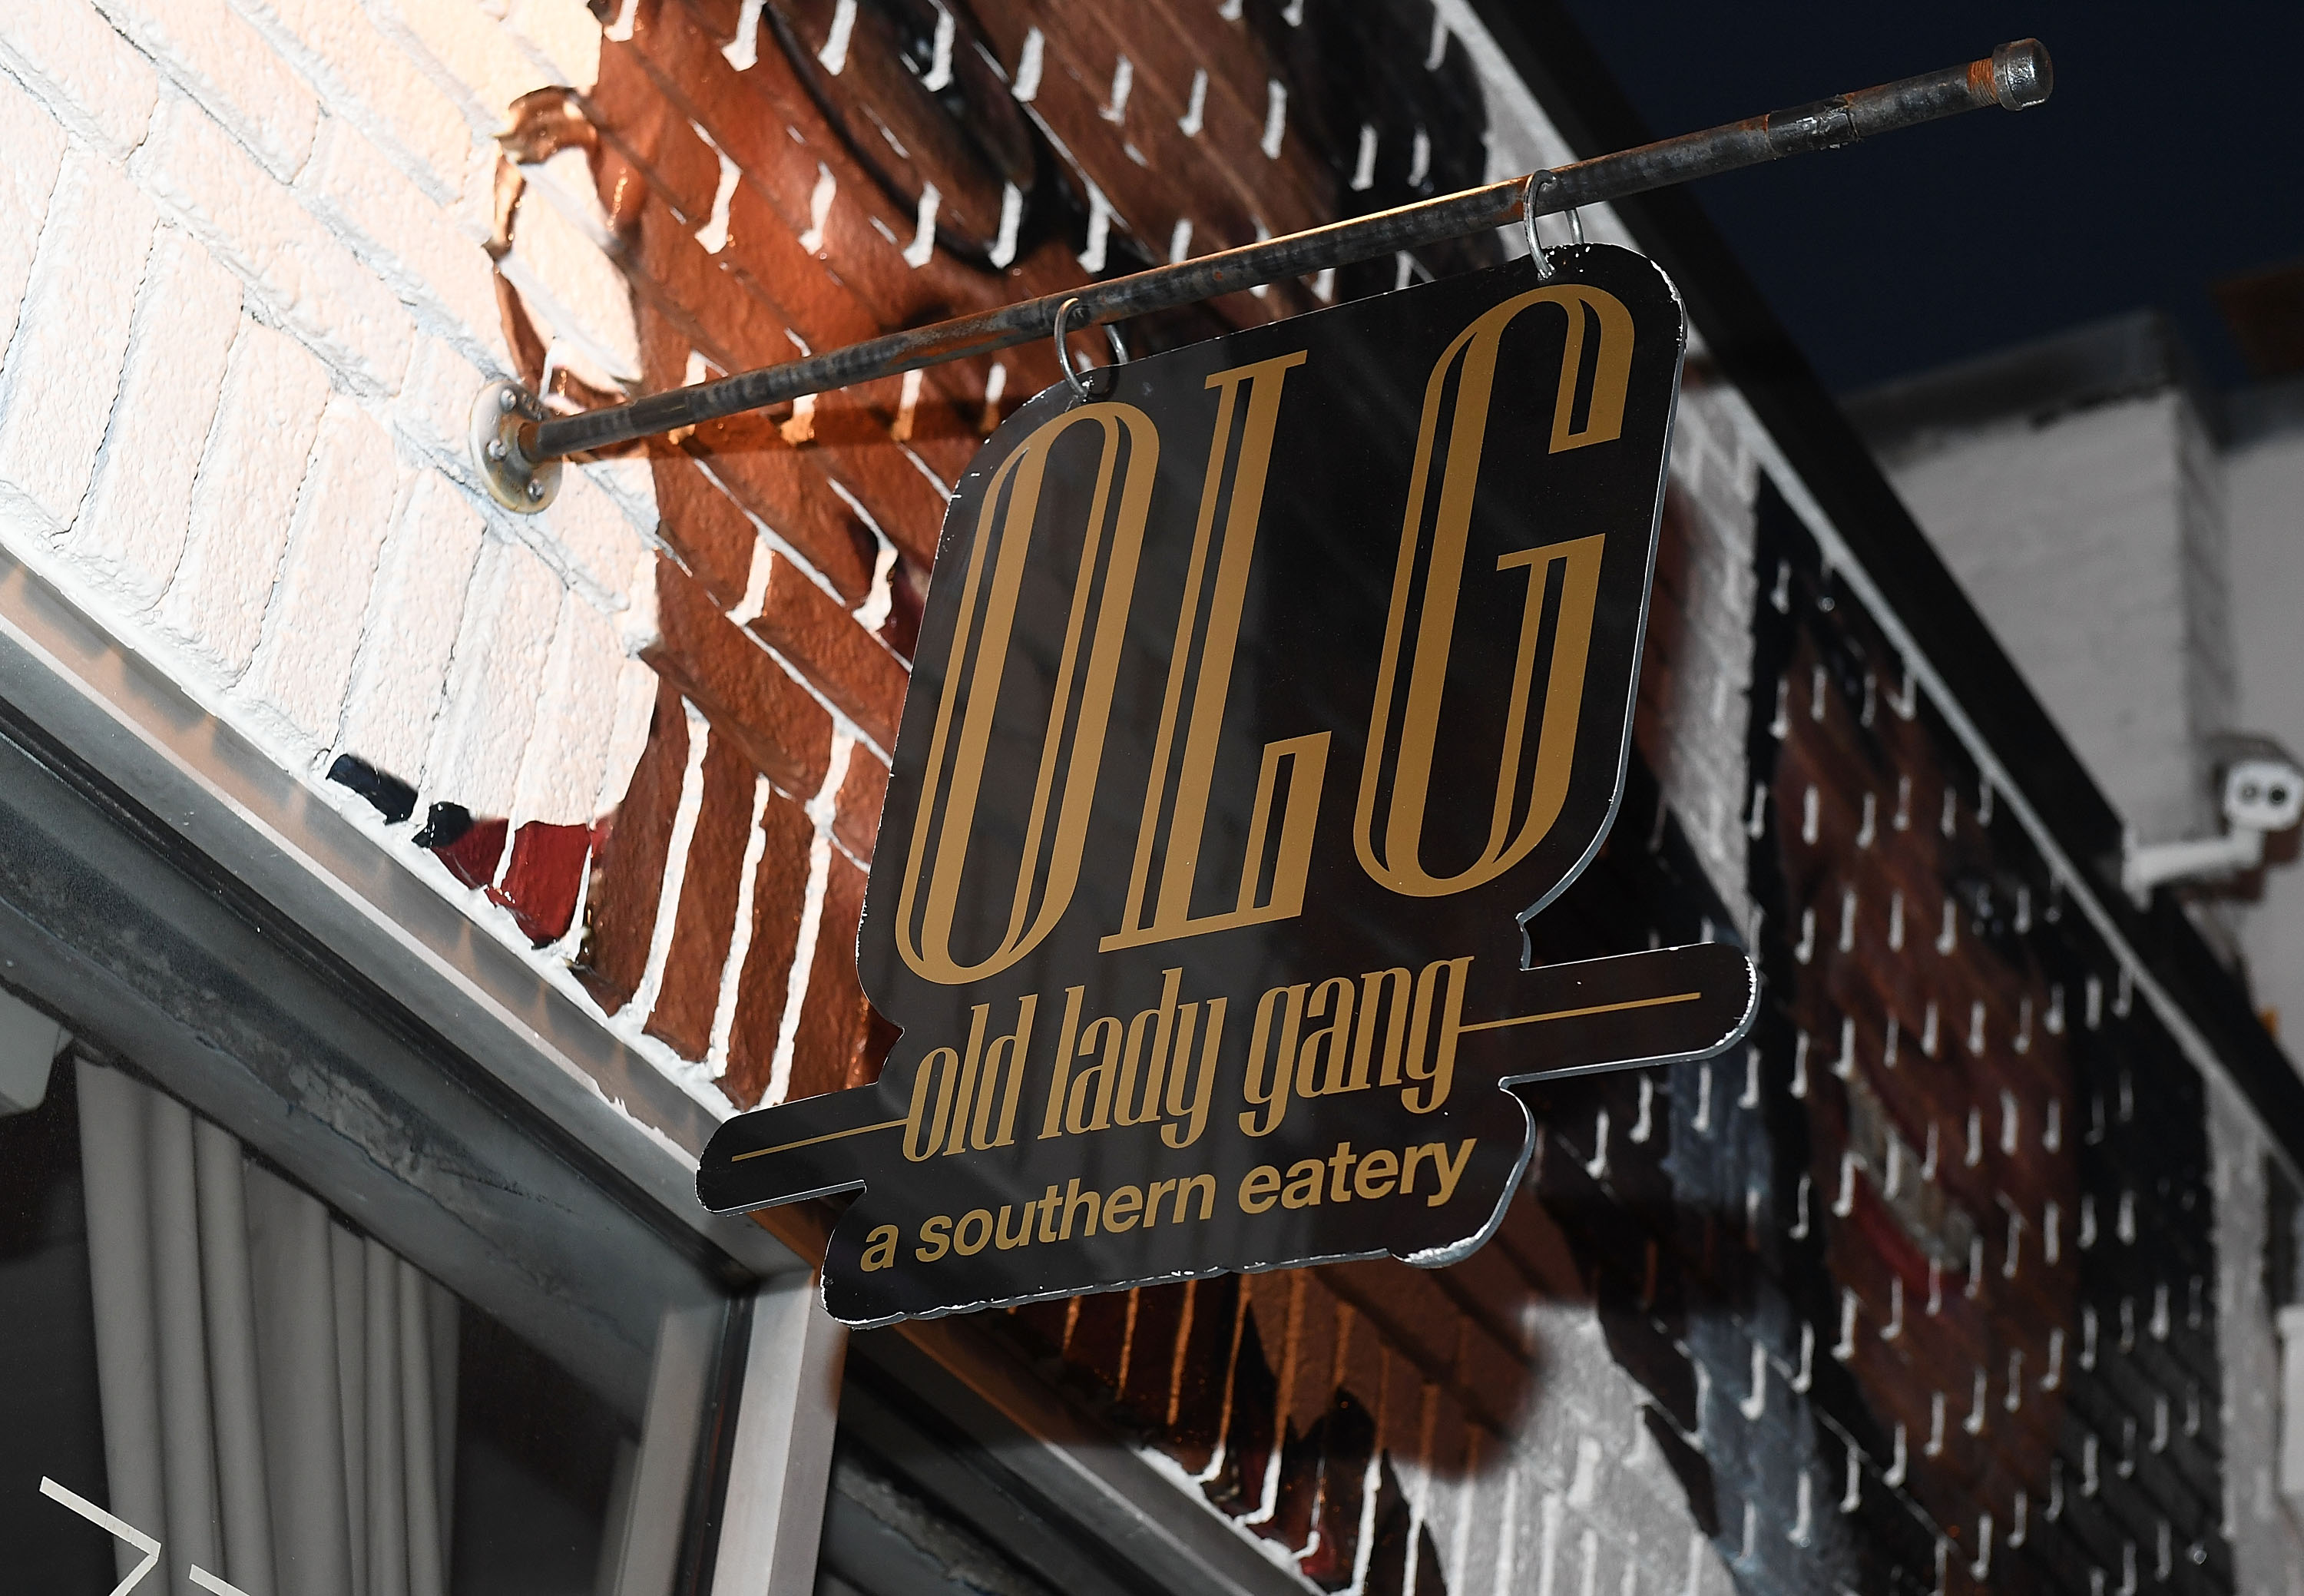 Old Lady Gang  A Southern Eatery